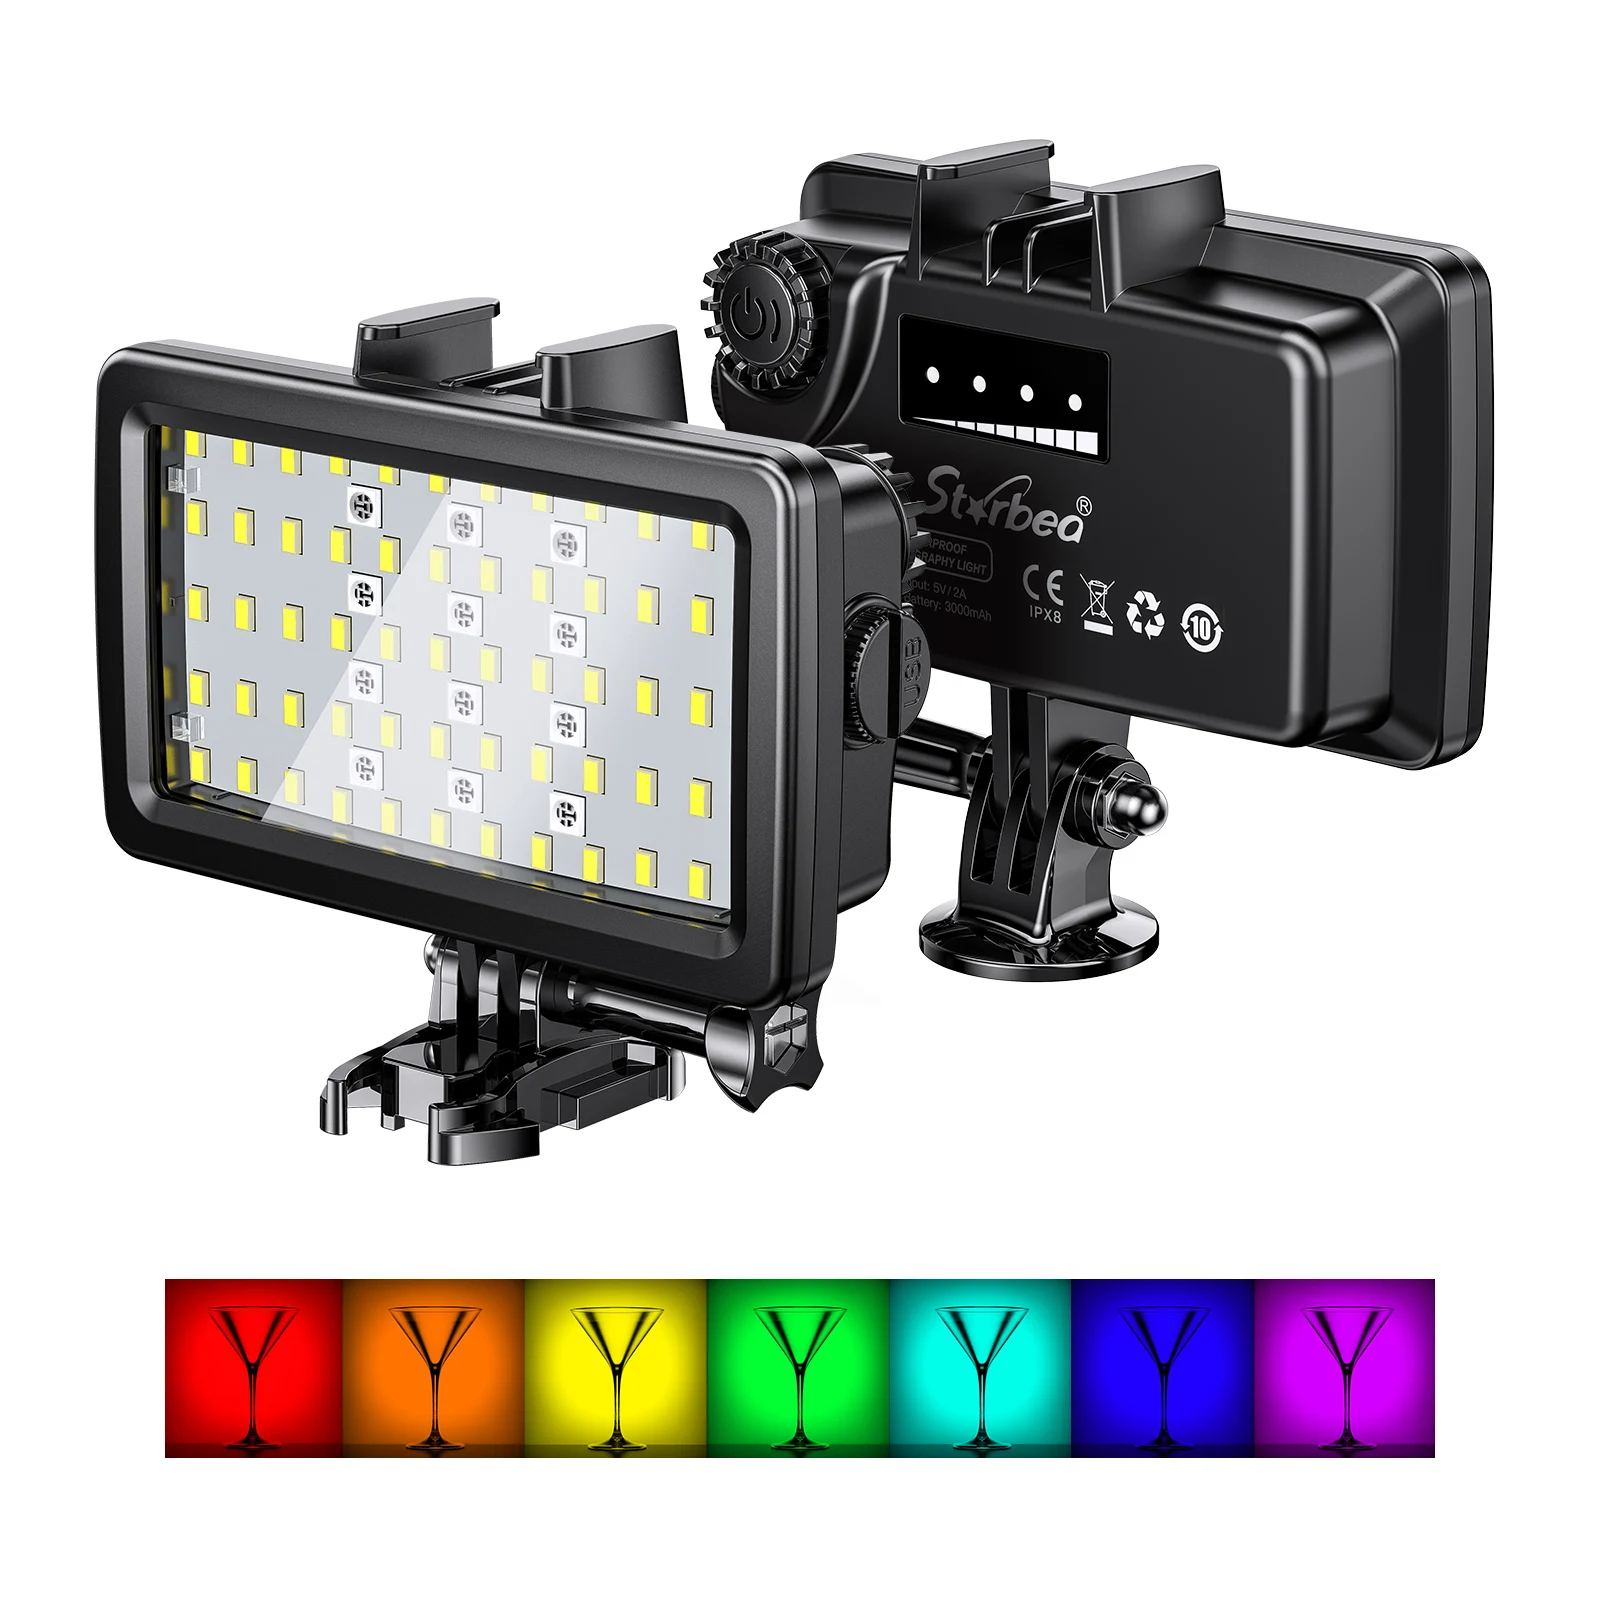 

Strbea Waterproof RGB Fill Light 5000LUX Rechargeable LED Camera Video Light 40m/130ft Underwater Photography Lighting